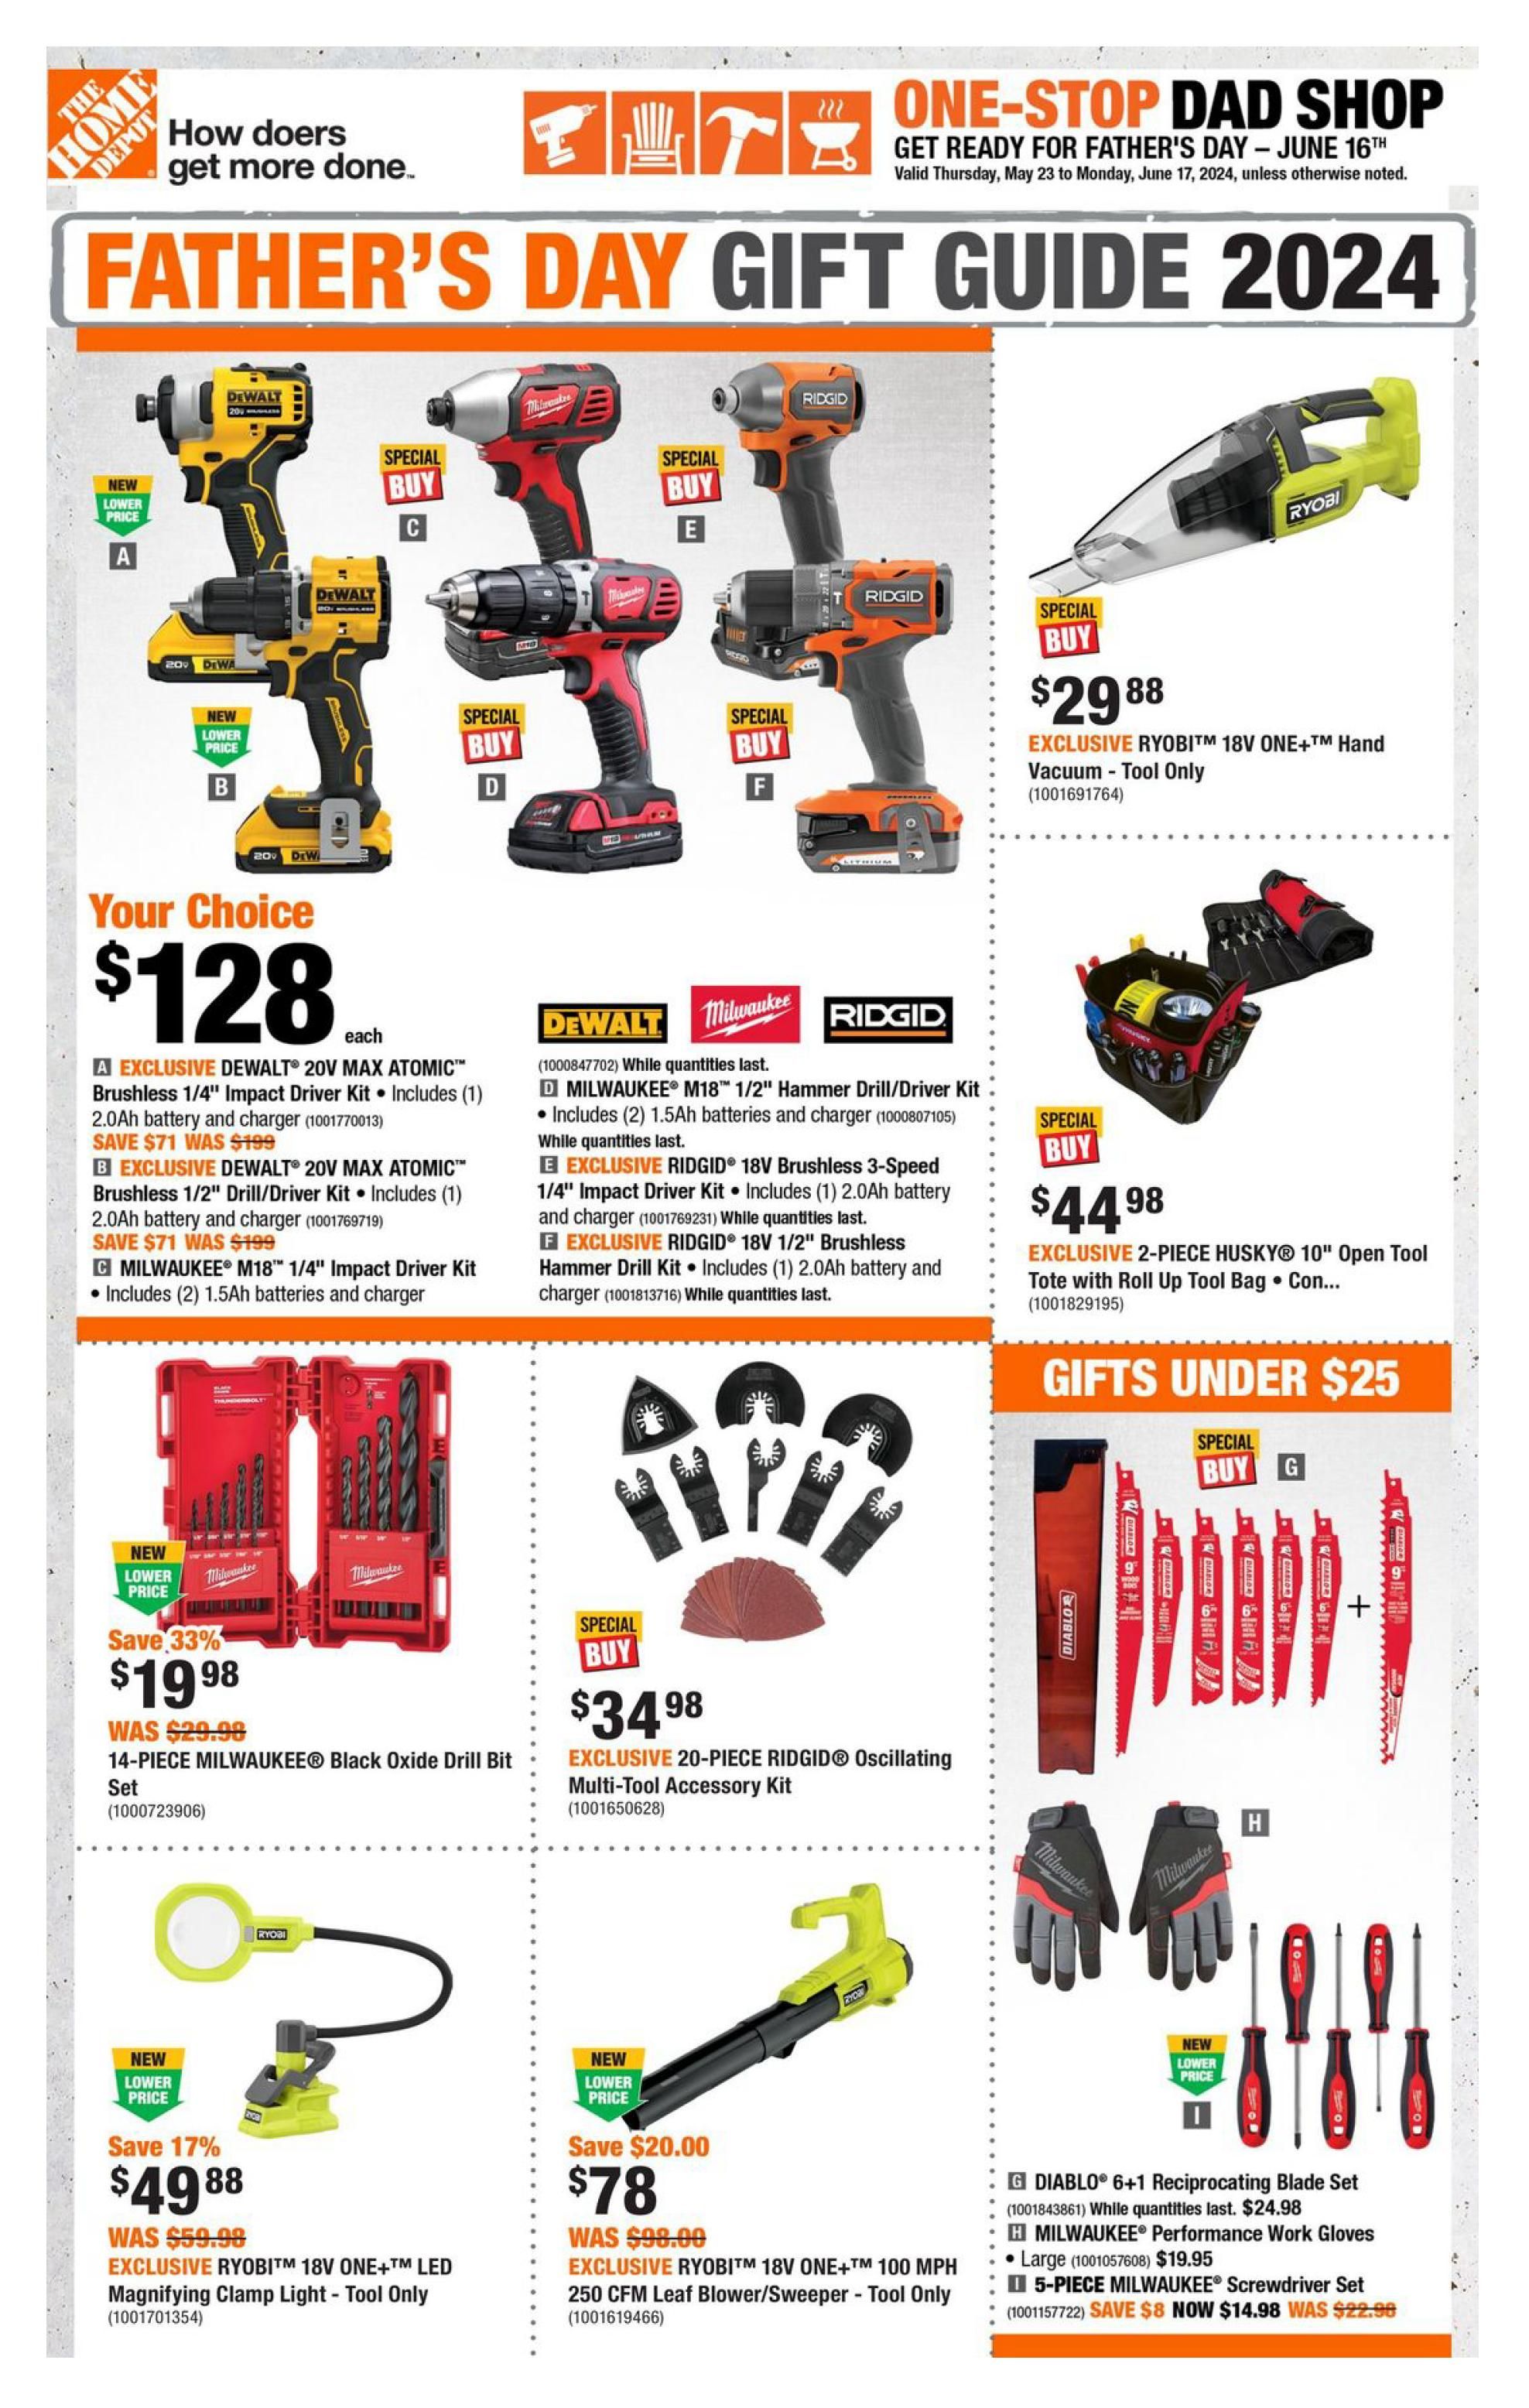 Home Depot - Father's Day Gift Guide